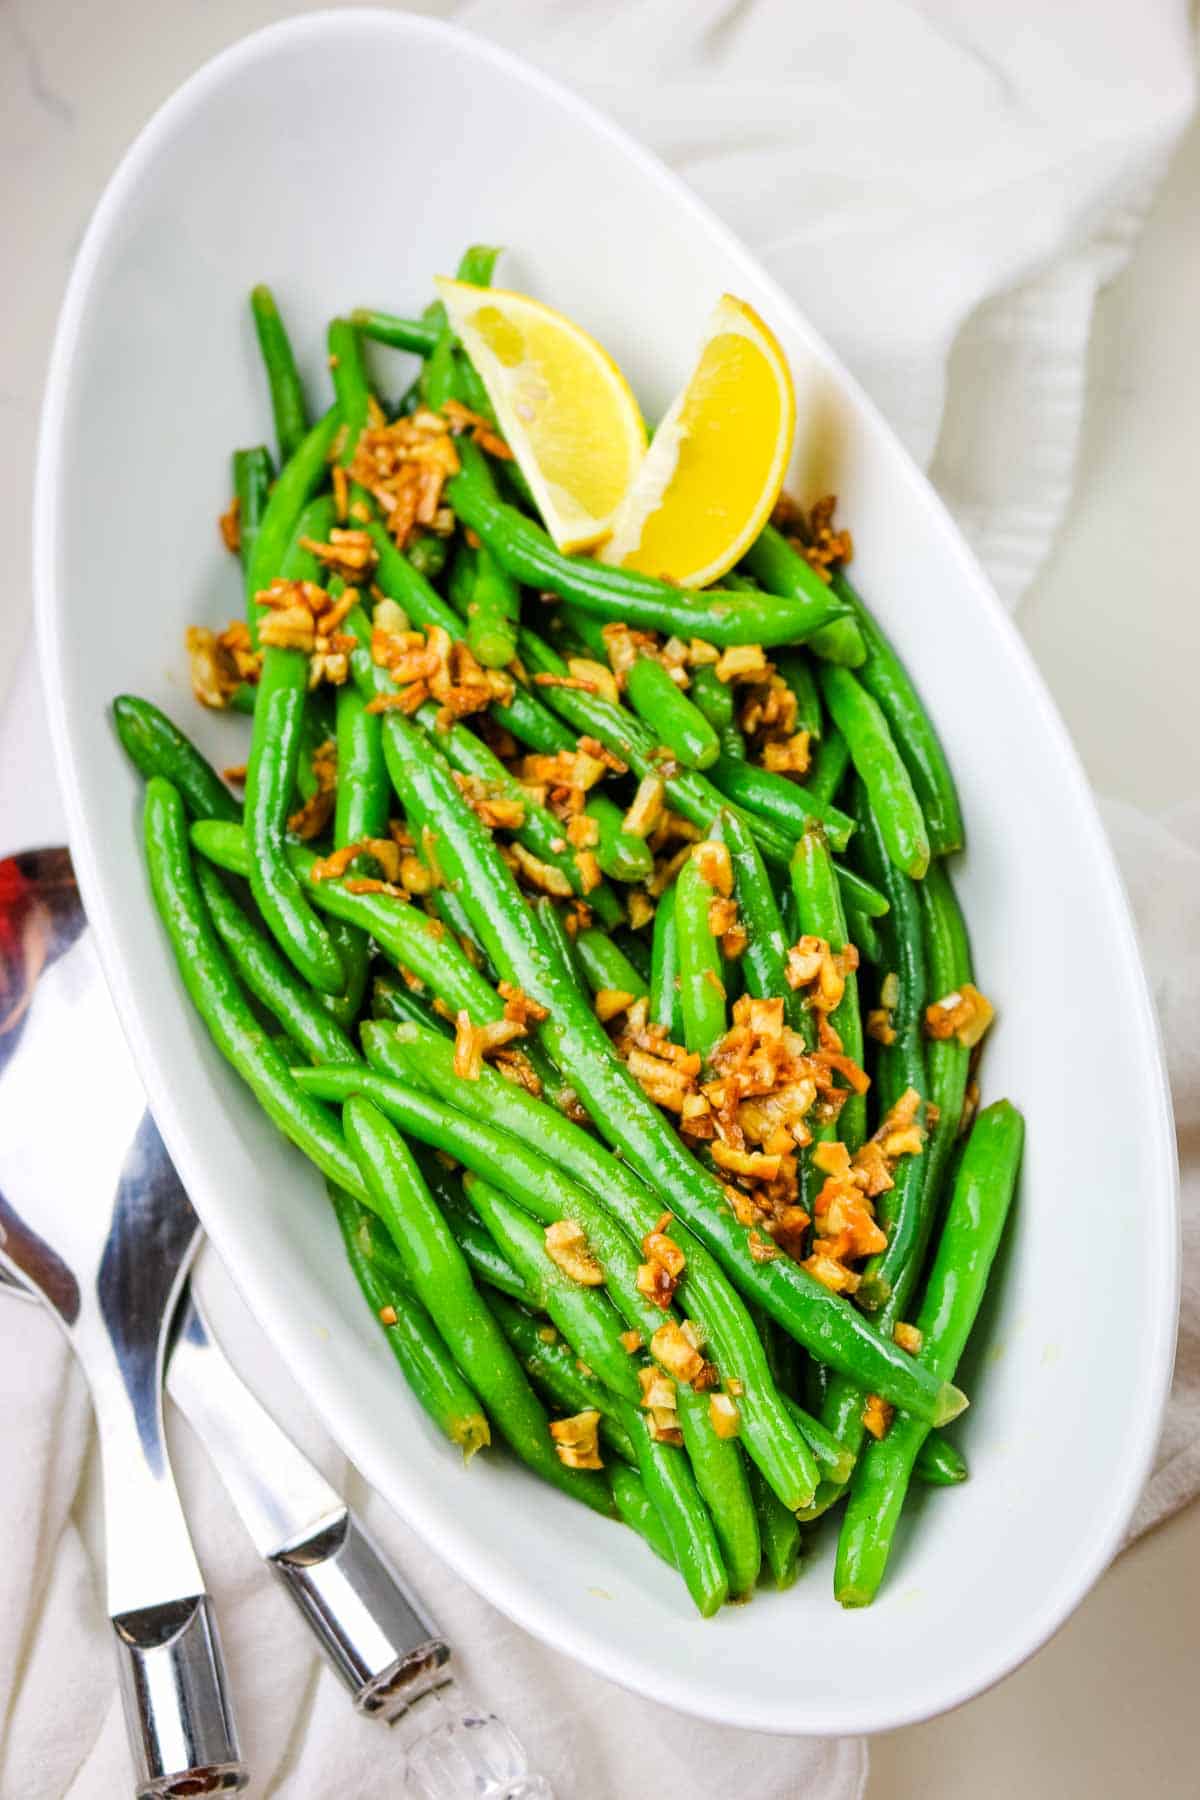 green beans with morsels of browned garlic and lemon wedges.